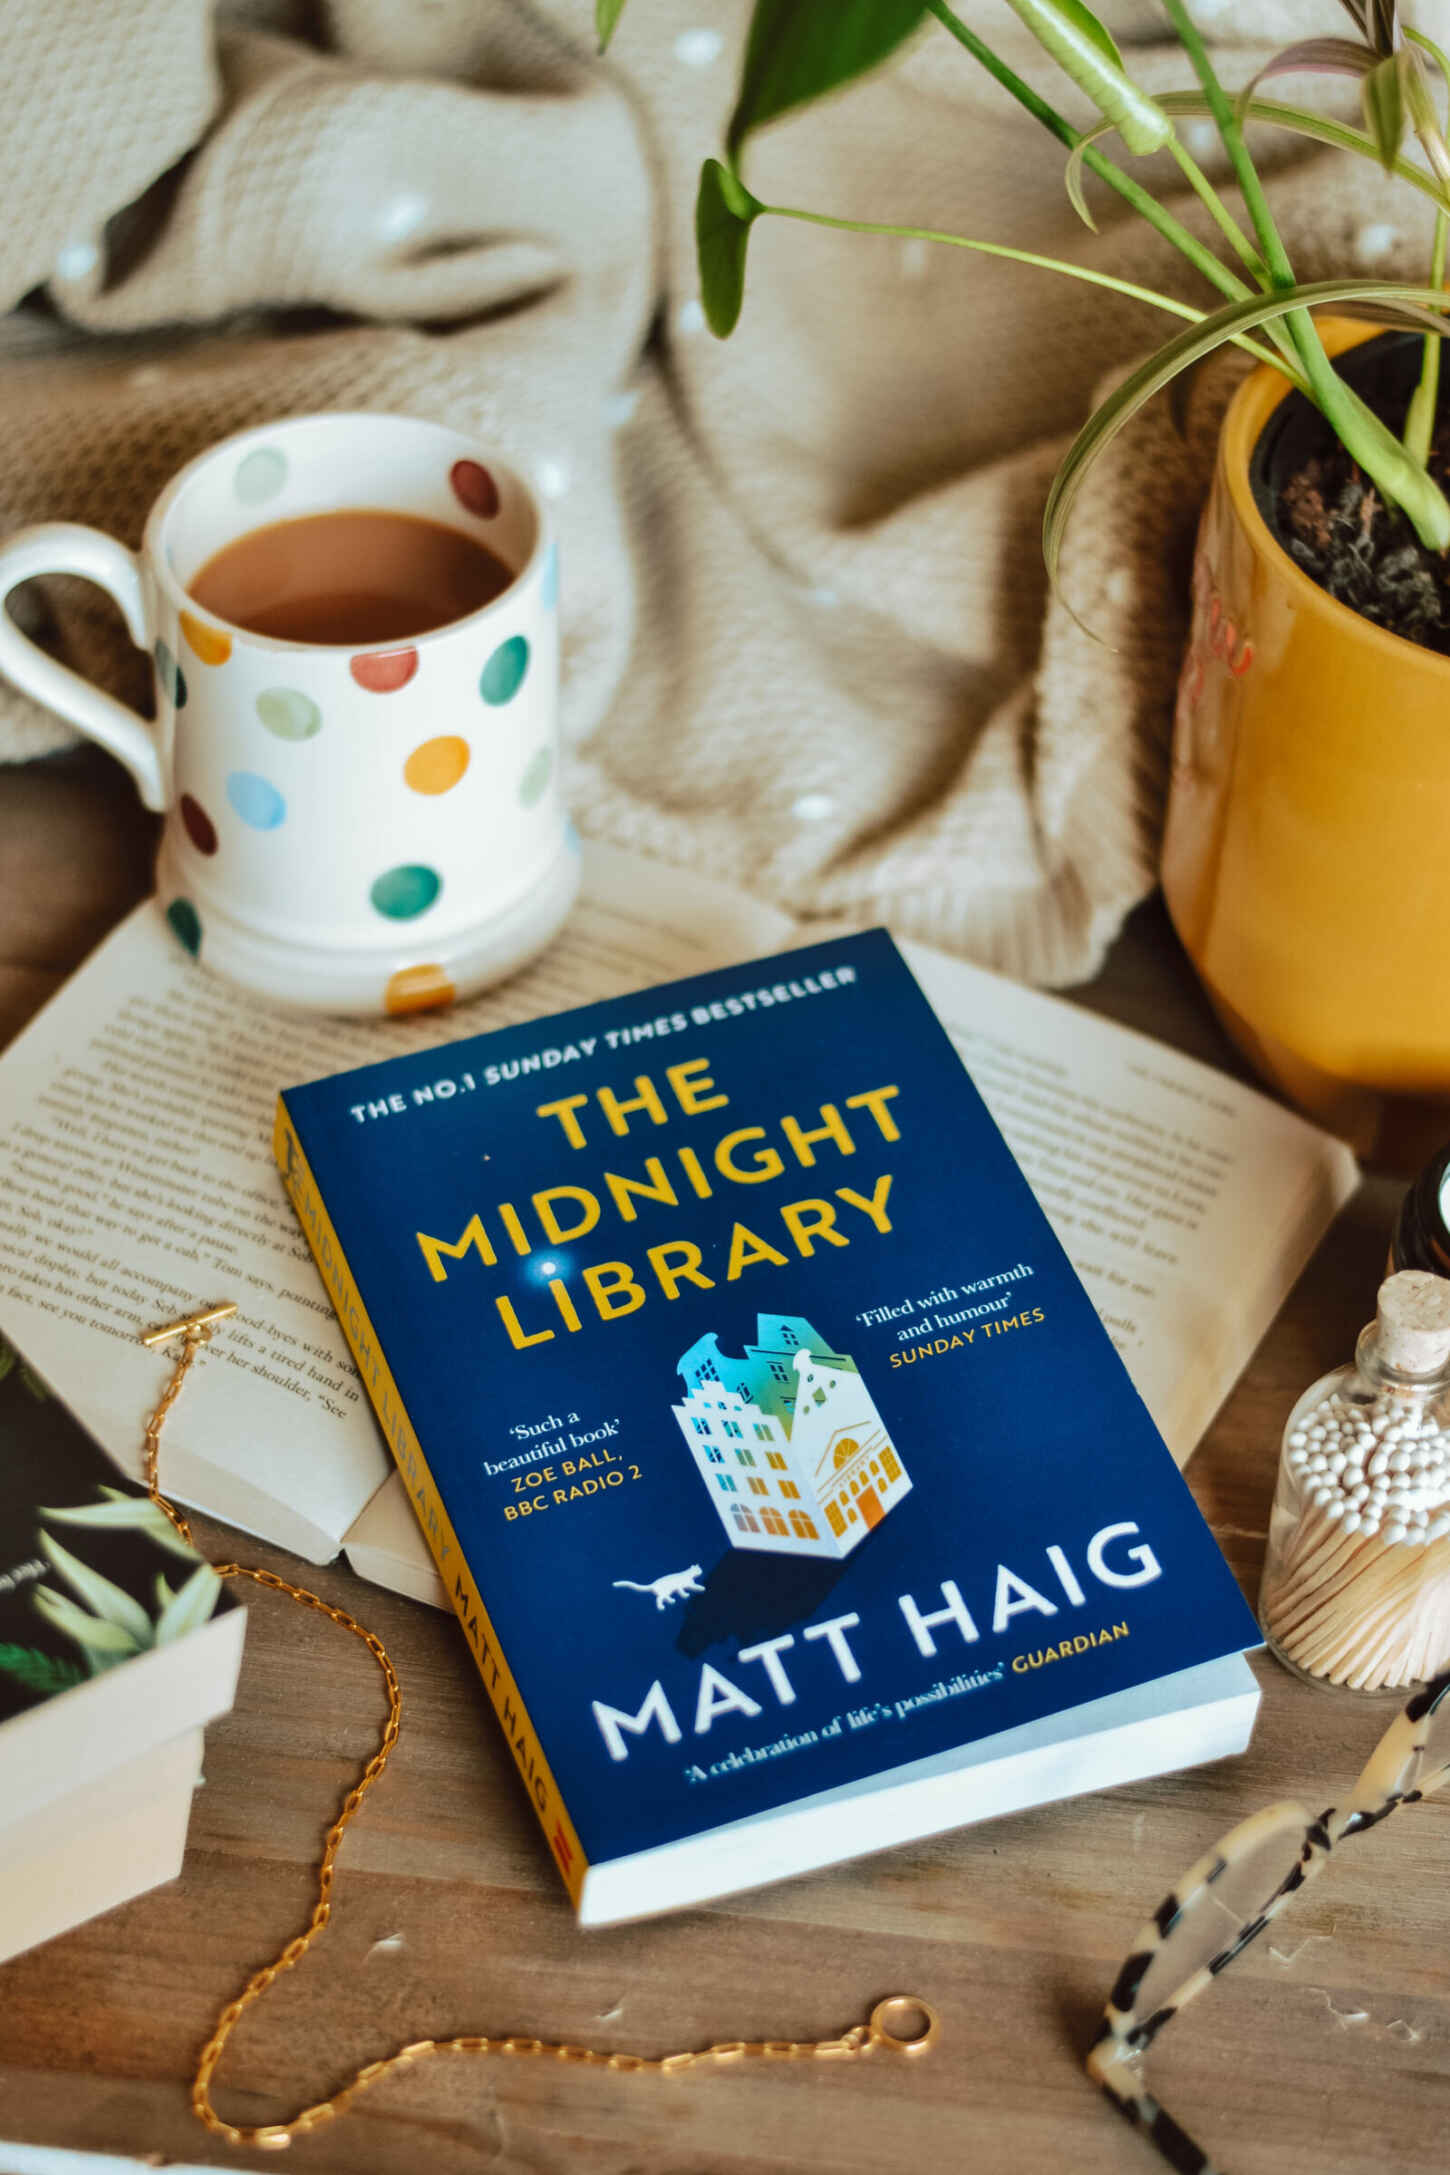 book reviews of the midnight library by matt haig